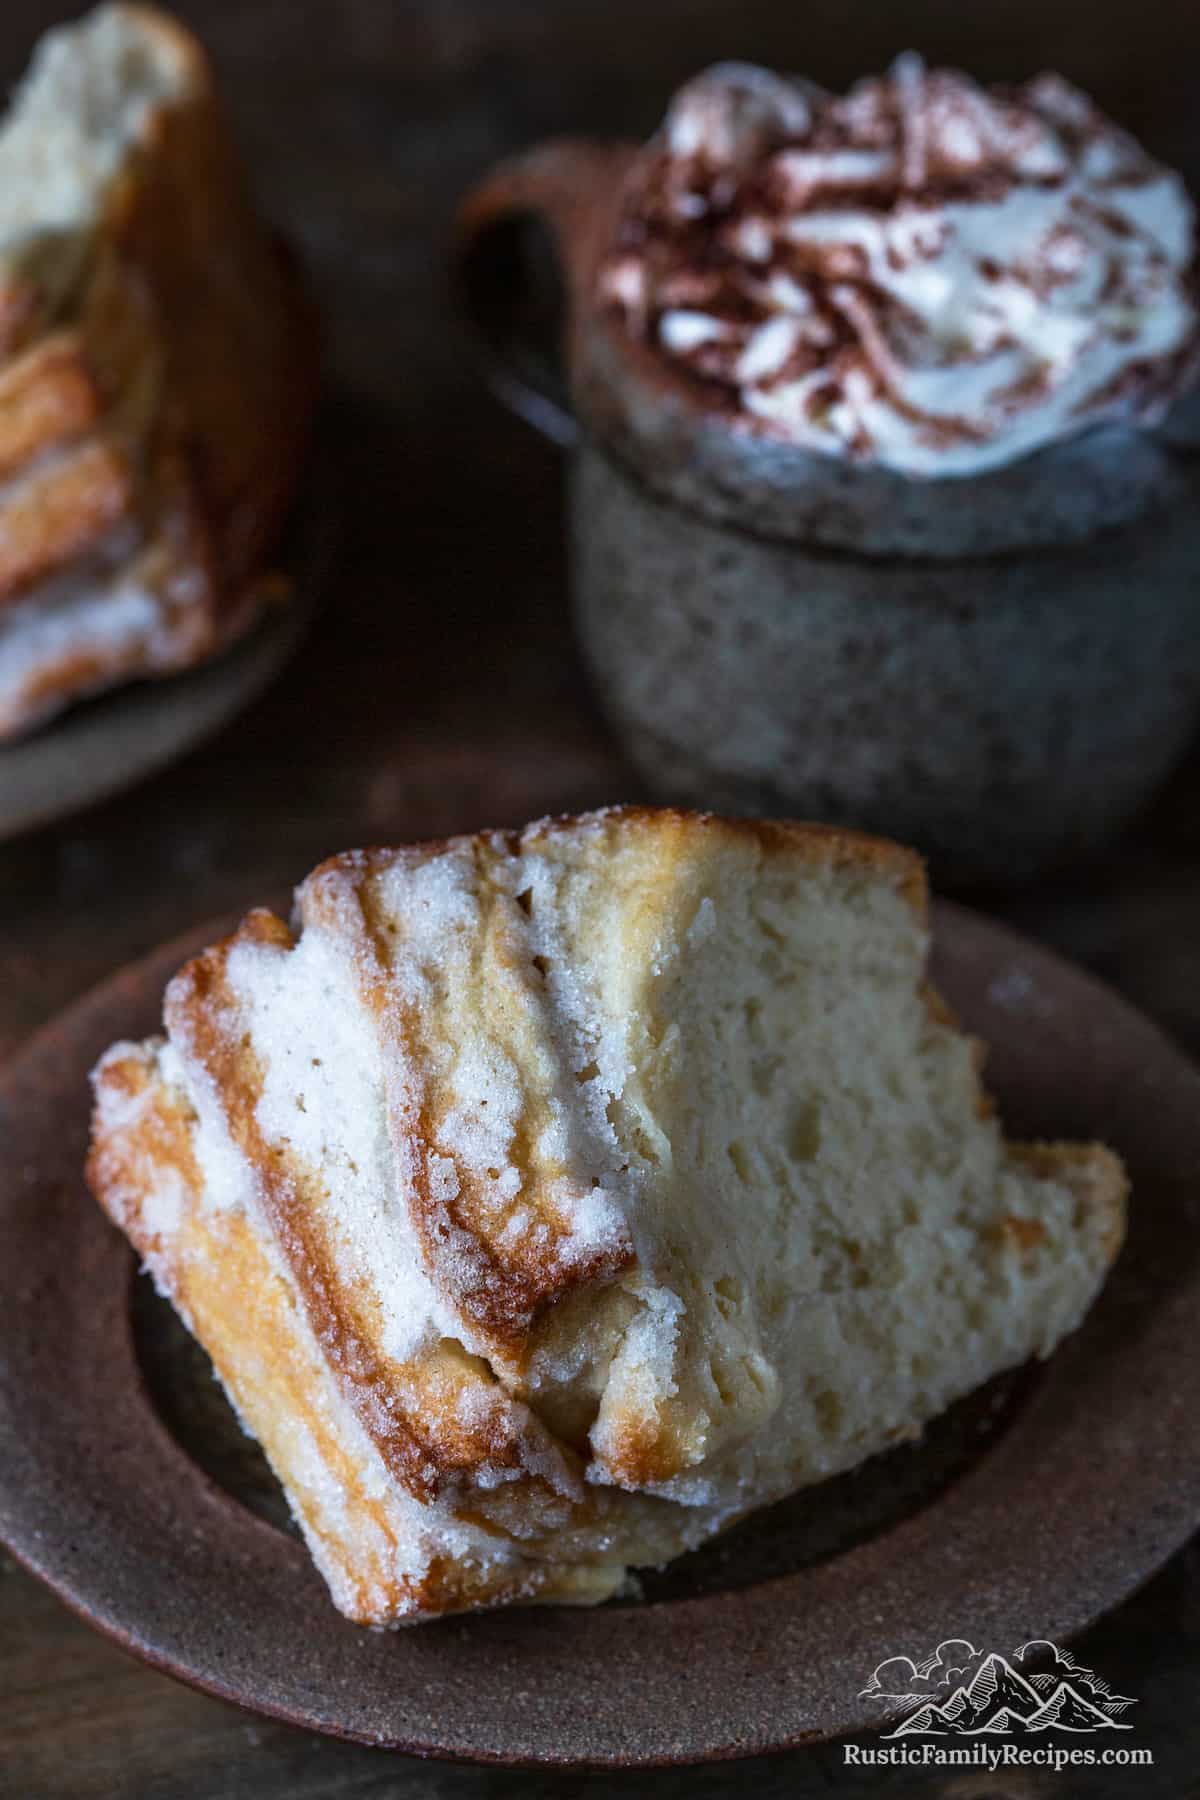 A slice of sugared monkey bread on a plate with a mug of hot cocoa.